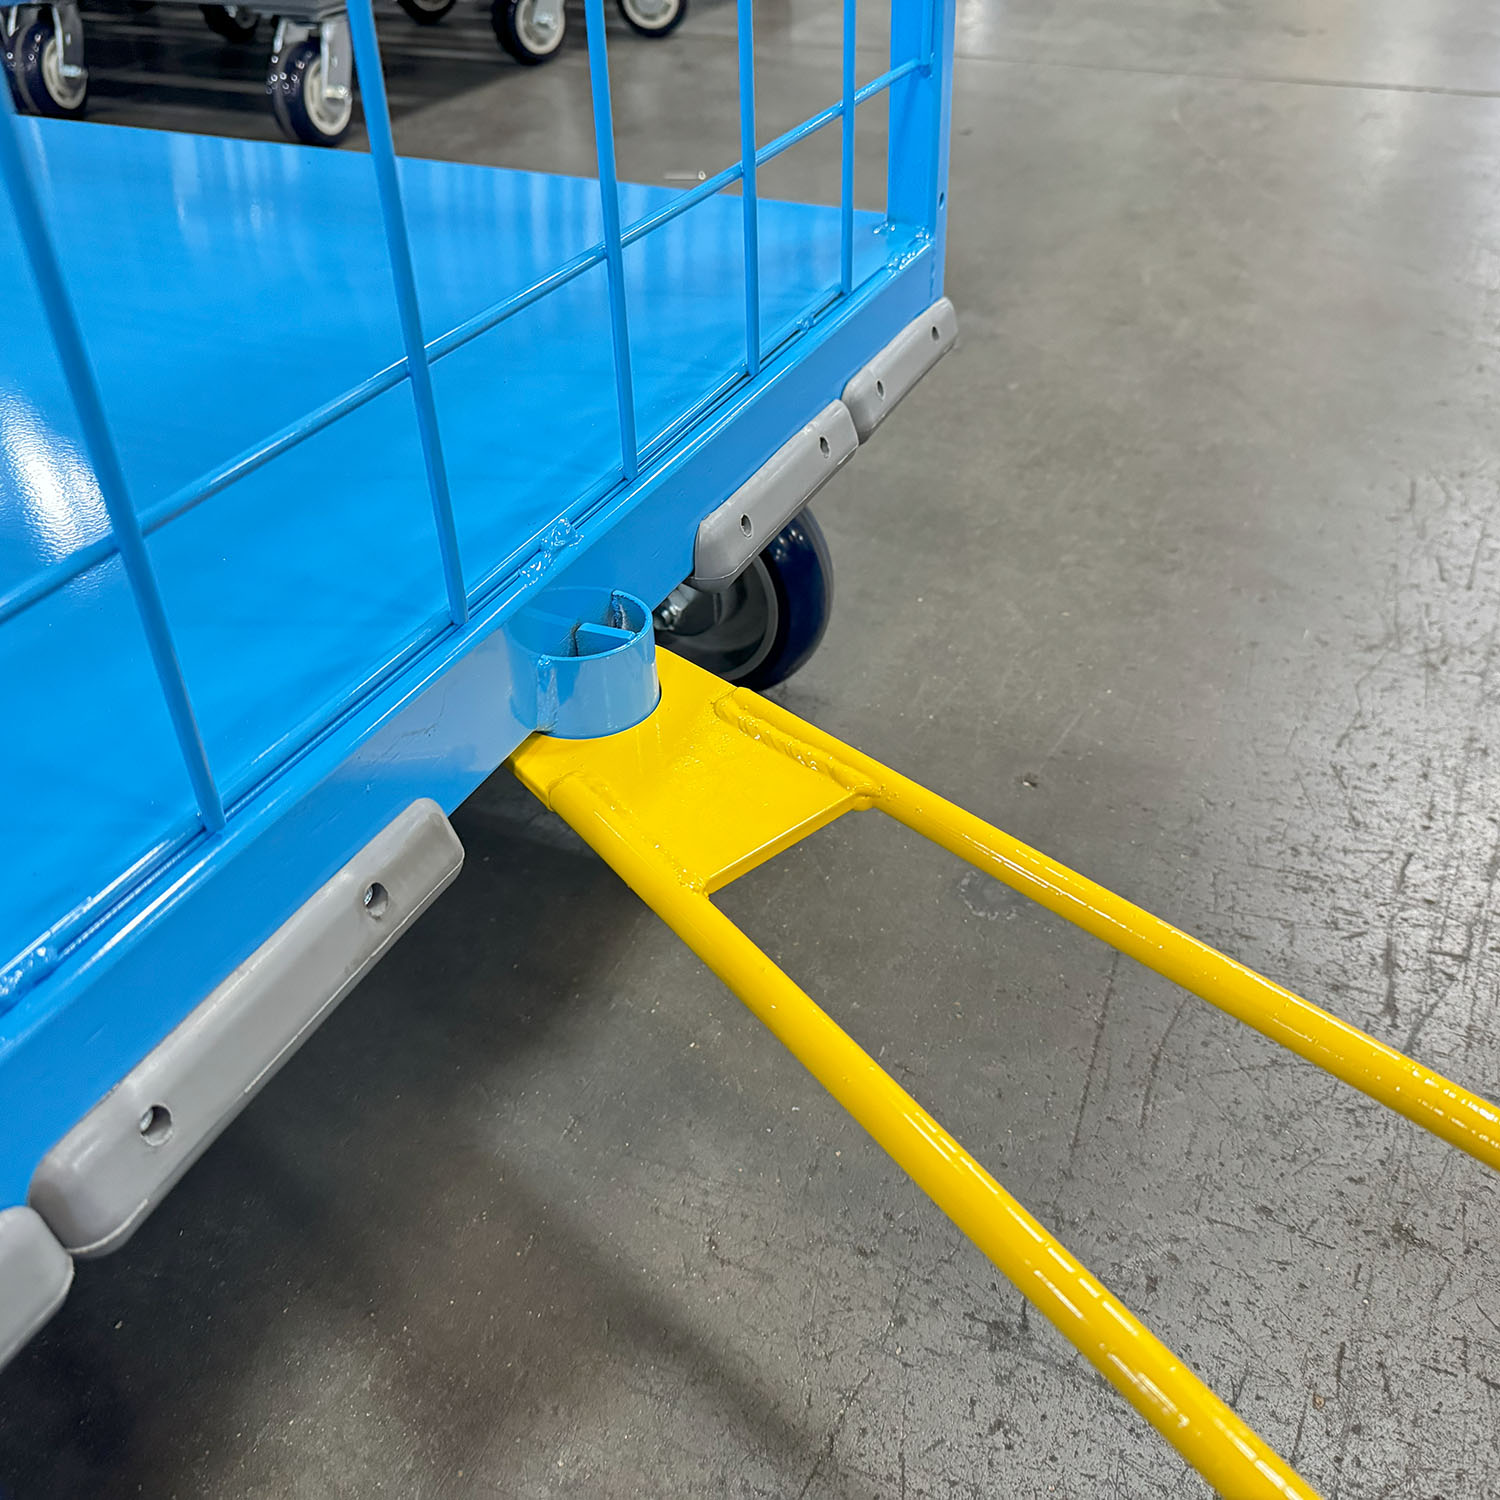 Spring-Loaded Tow Bar: The spring-loaded tow bar is a crucial feature that enhances the cart's maneuverability and ease of use. It allows the cart to be easily attached to a tugger or tow vehicle for transportation within the warehouse or distribution center. The spring-loaded mechanism ensures smooth coupling and decoupling, reducing strain on the operator and minimizing the risk of accidents.